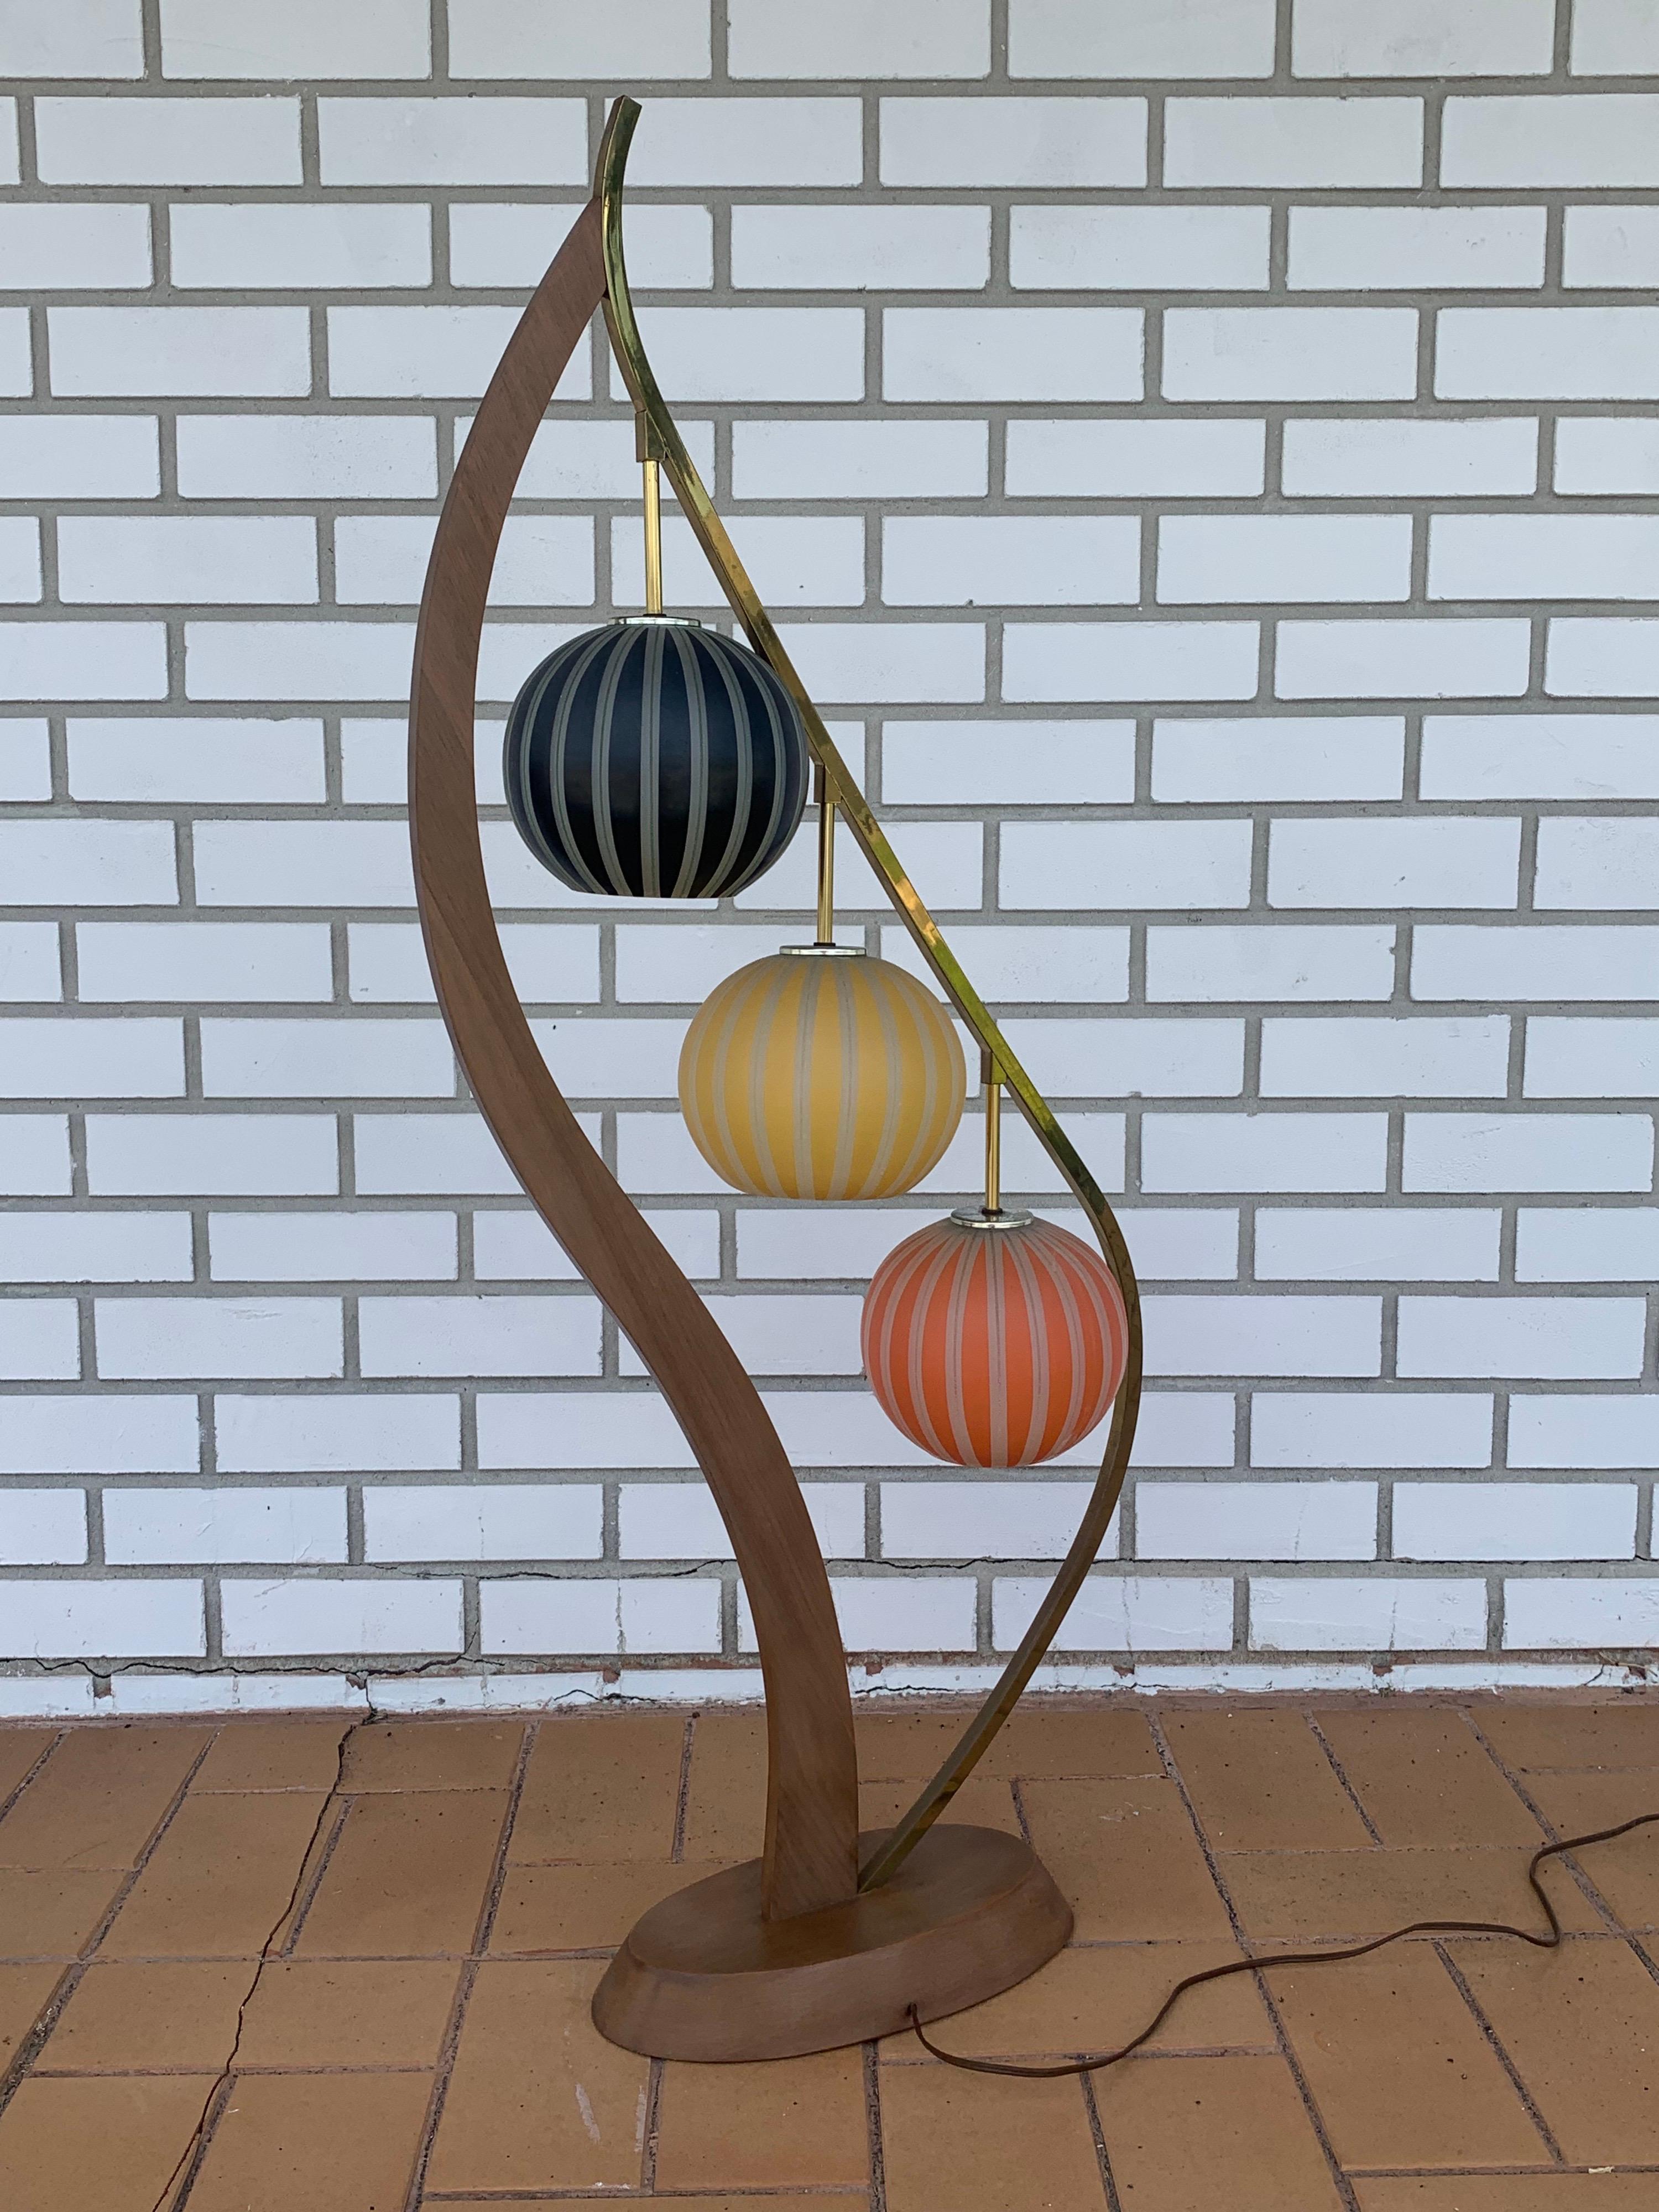 Mid-Century Modern floor lamp. Has a beautiful harp shape in wood and brass. 3 globes in Blue, Yellow and Red. Each turn of the light switch will turn on a different number of bulbs from 1 to 2 to 3 then off to offer a variety of lighting options.